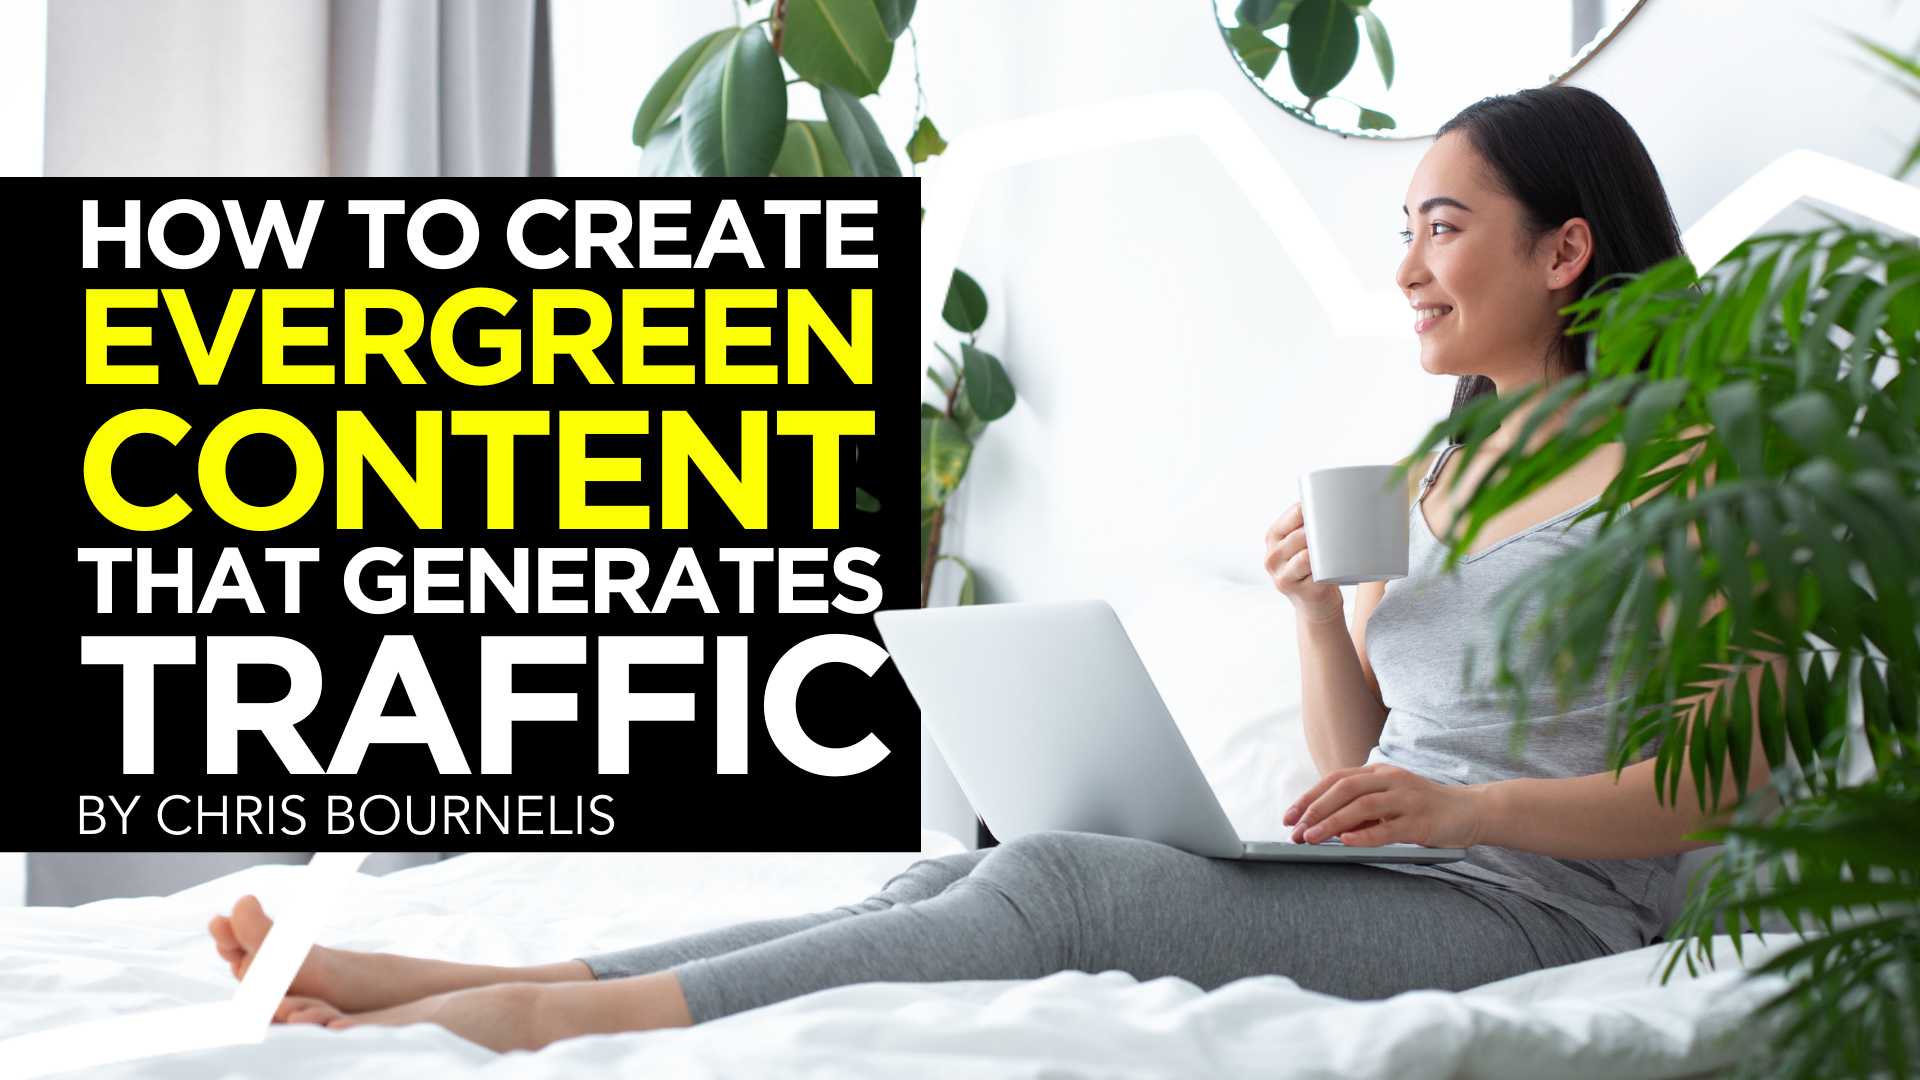 How to Create Evergreen Content That Generates Traffic to Your Site